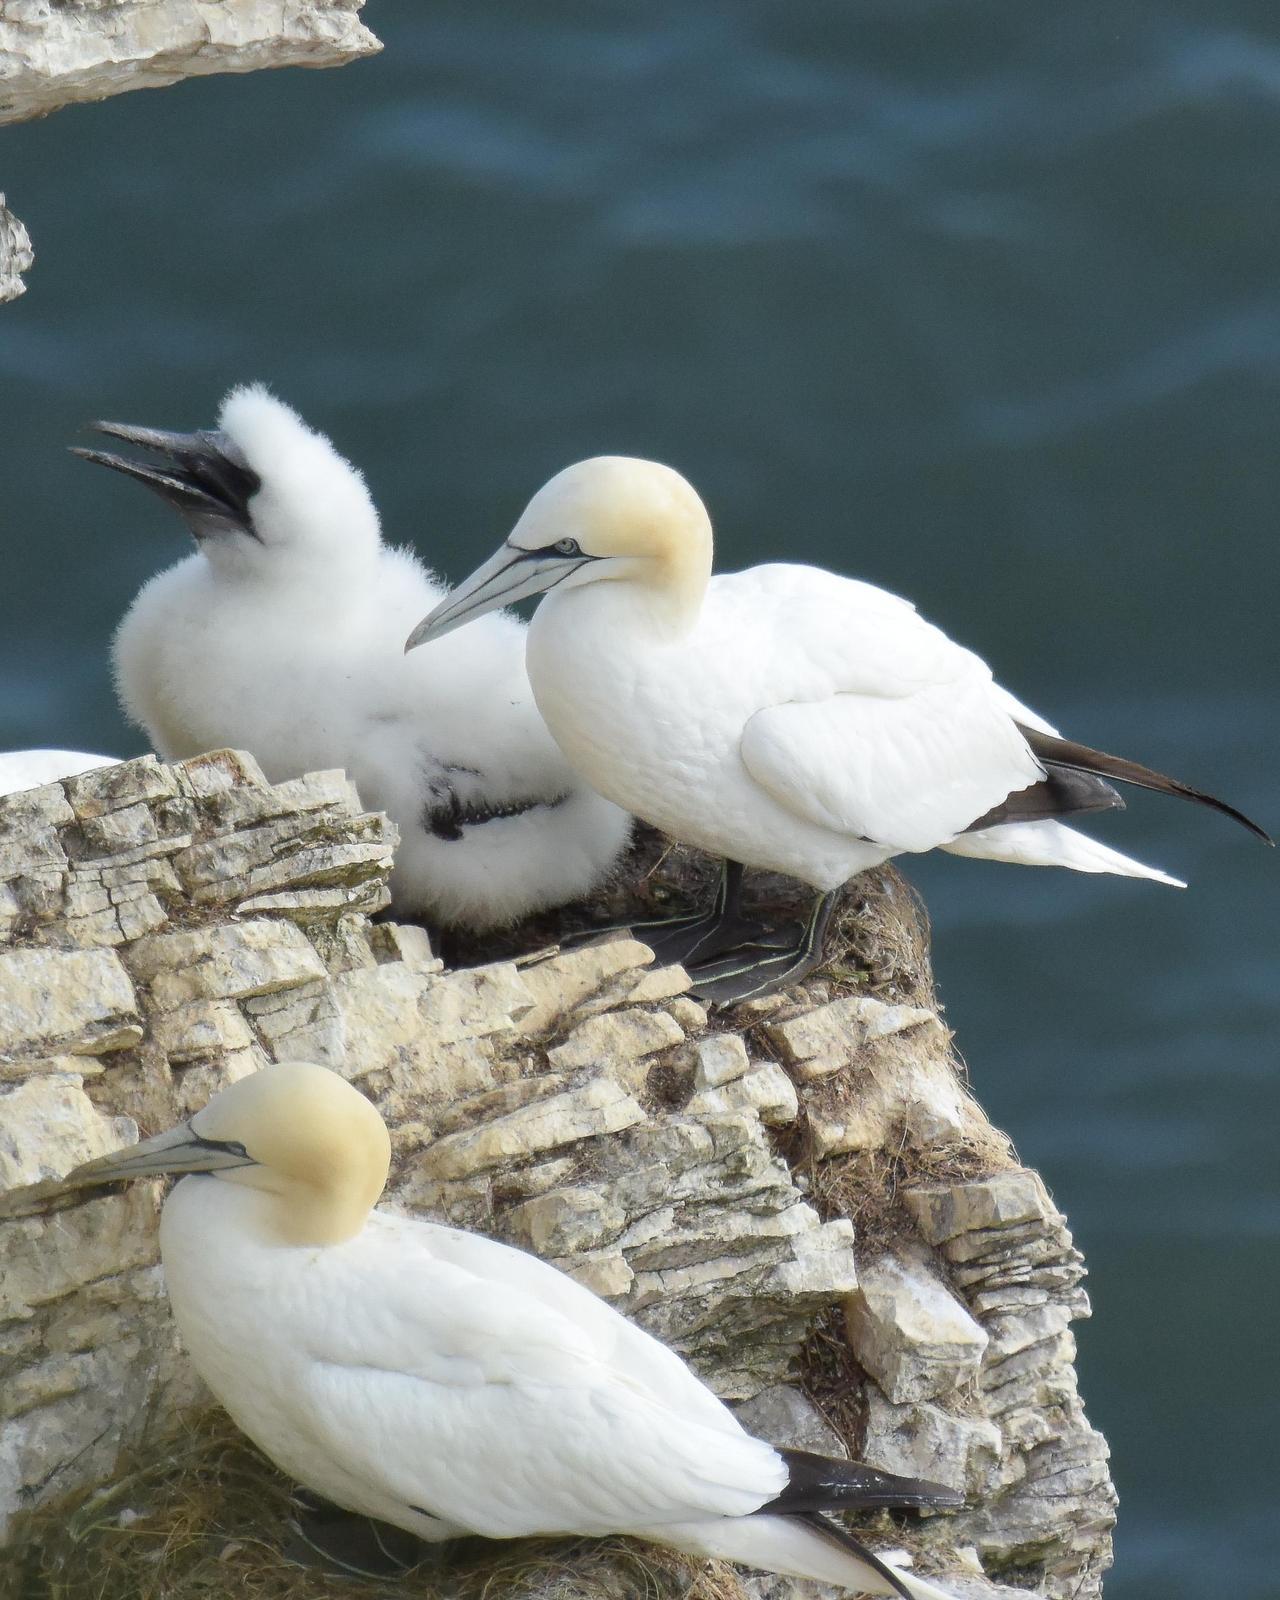 Northern Gannet Photo by Emily Percival